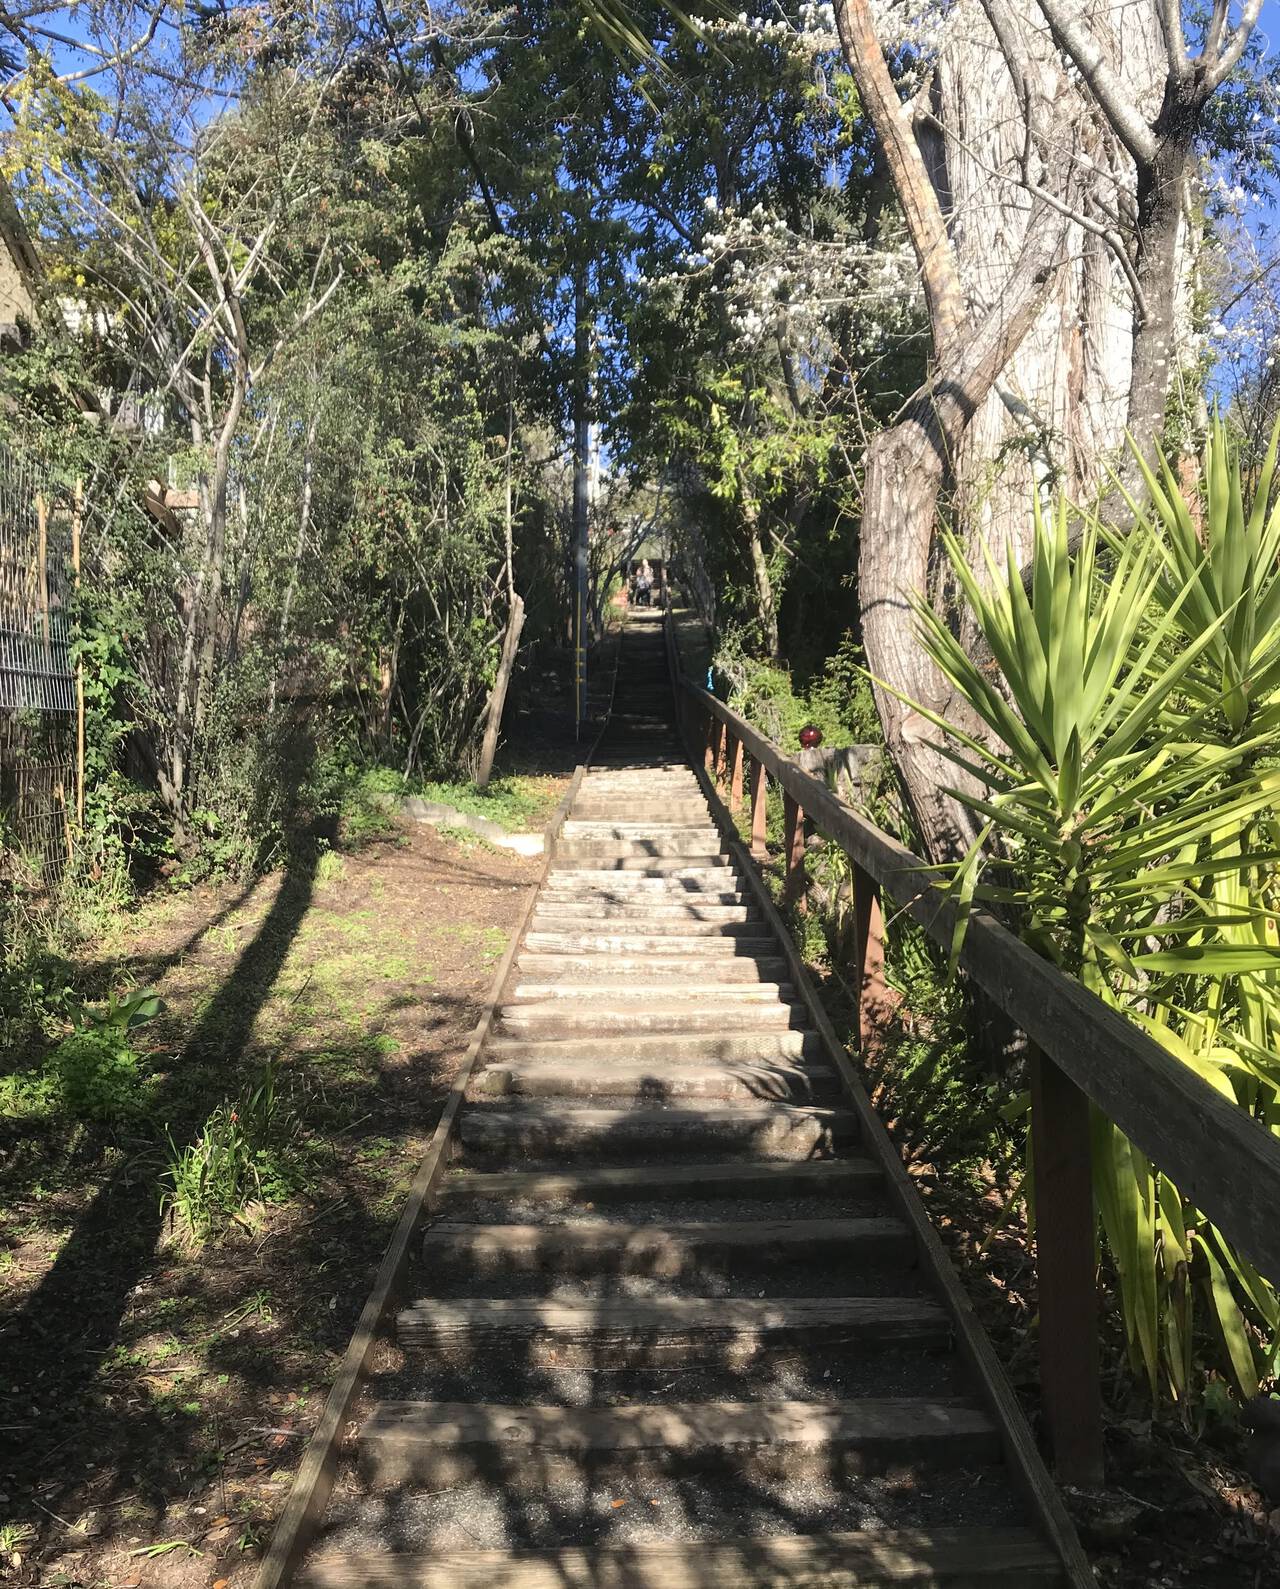 One of Mill Valley's many beautiful staircases